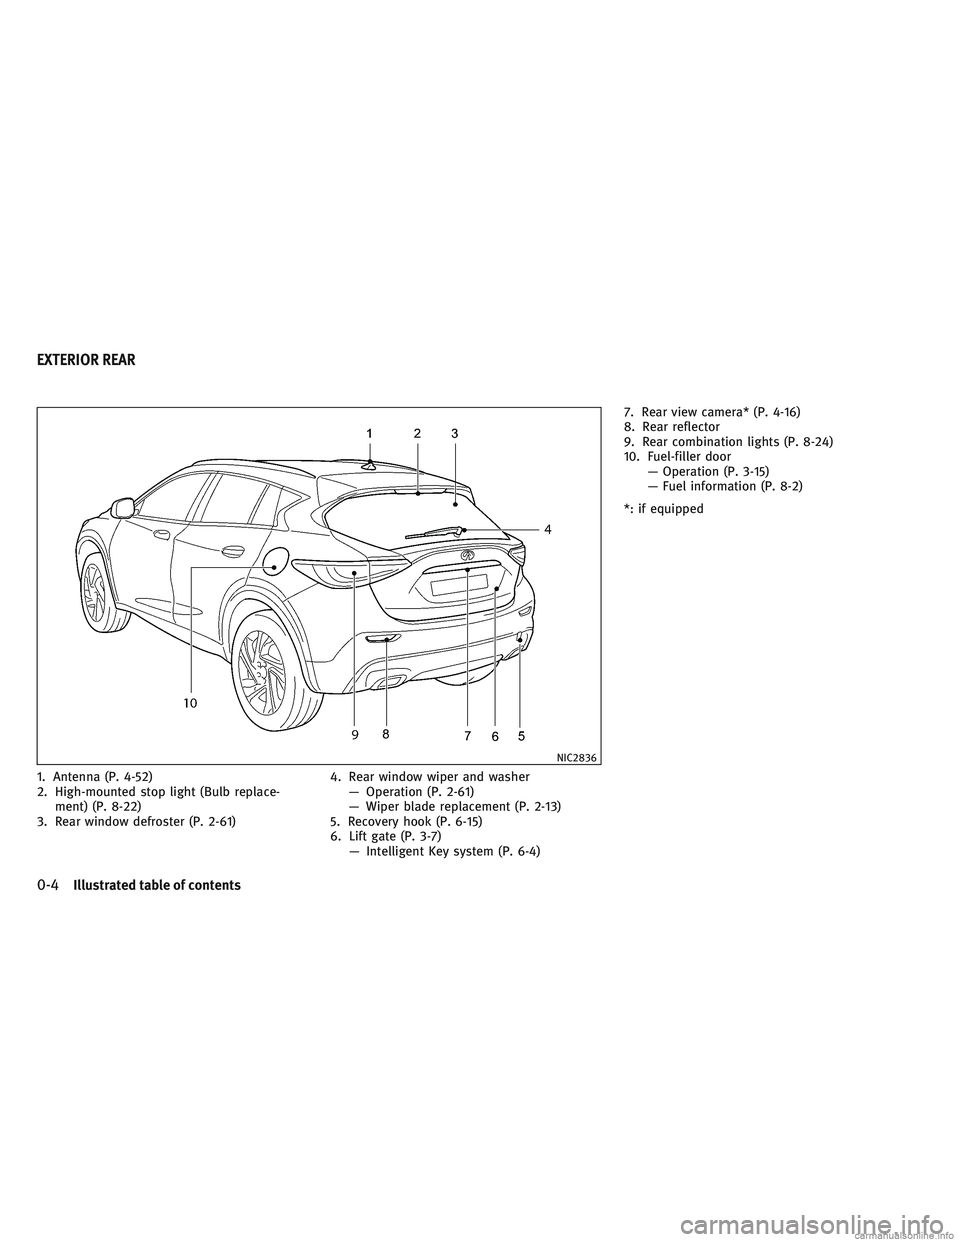 INFINITI QX30 2017  Owners Manual 1. Antenna (P. 4-52)
2. High-mounted stop light (Bulb replace-ment) (P. 8-22)
3. Rear window defroster (P. 2-61) 4. Rear window wiper and washer
— Operation (P. 2-61)
— Wiper blade replacement (P.